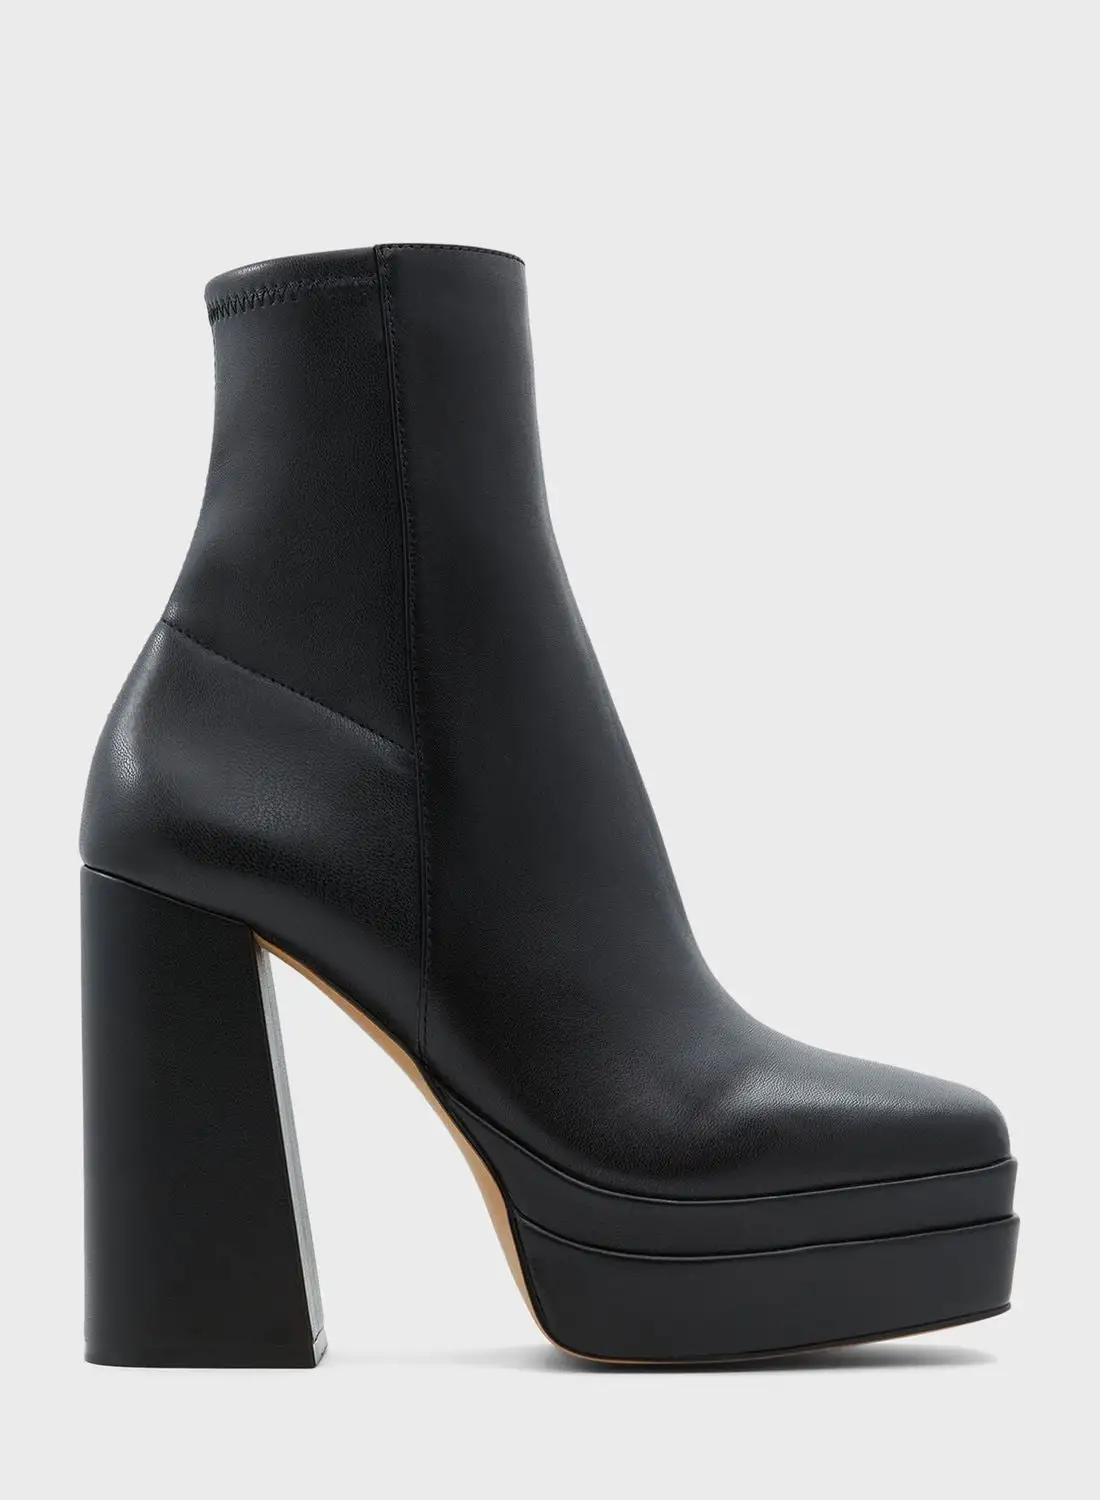 ALDO Mabel Ankle Boots